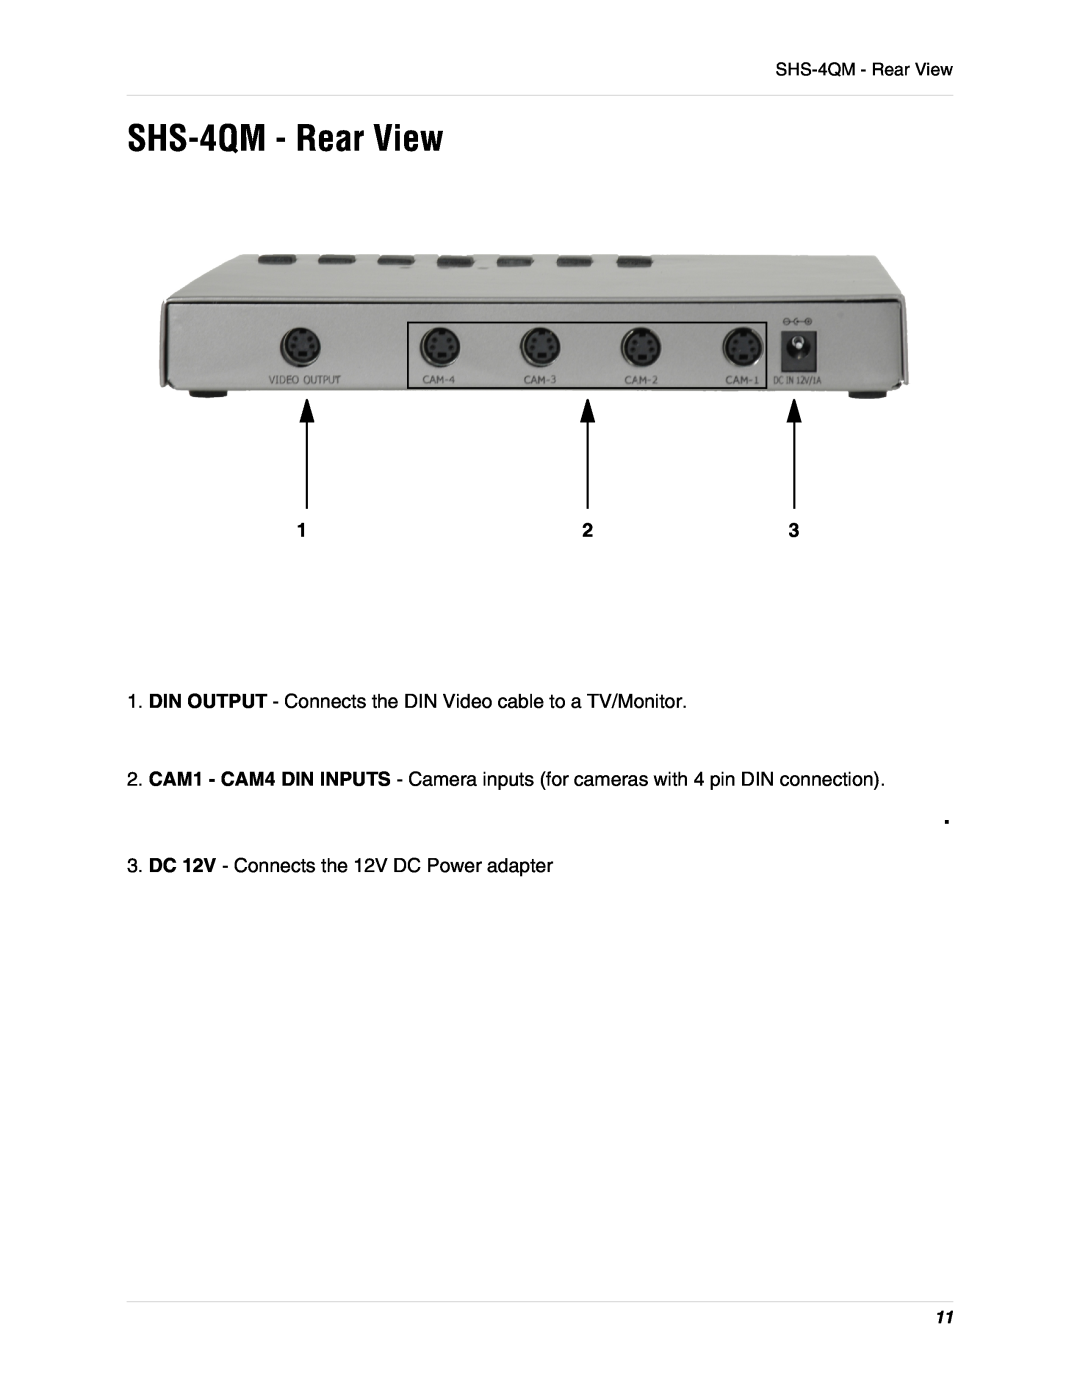 LOREX Technology instruction manual SHS-4QM - Rear View, DIN OUTPUT - Connects the DIN Video cable to a TV/Monitor 